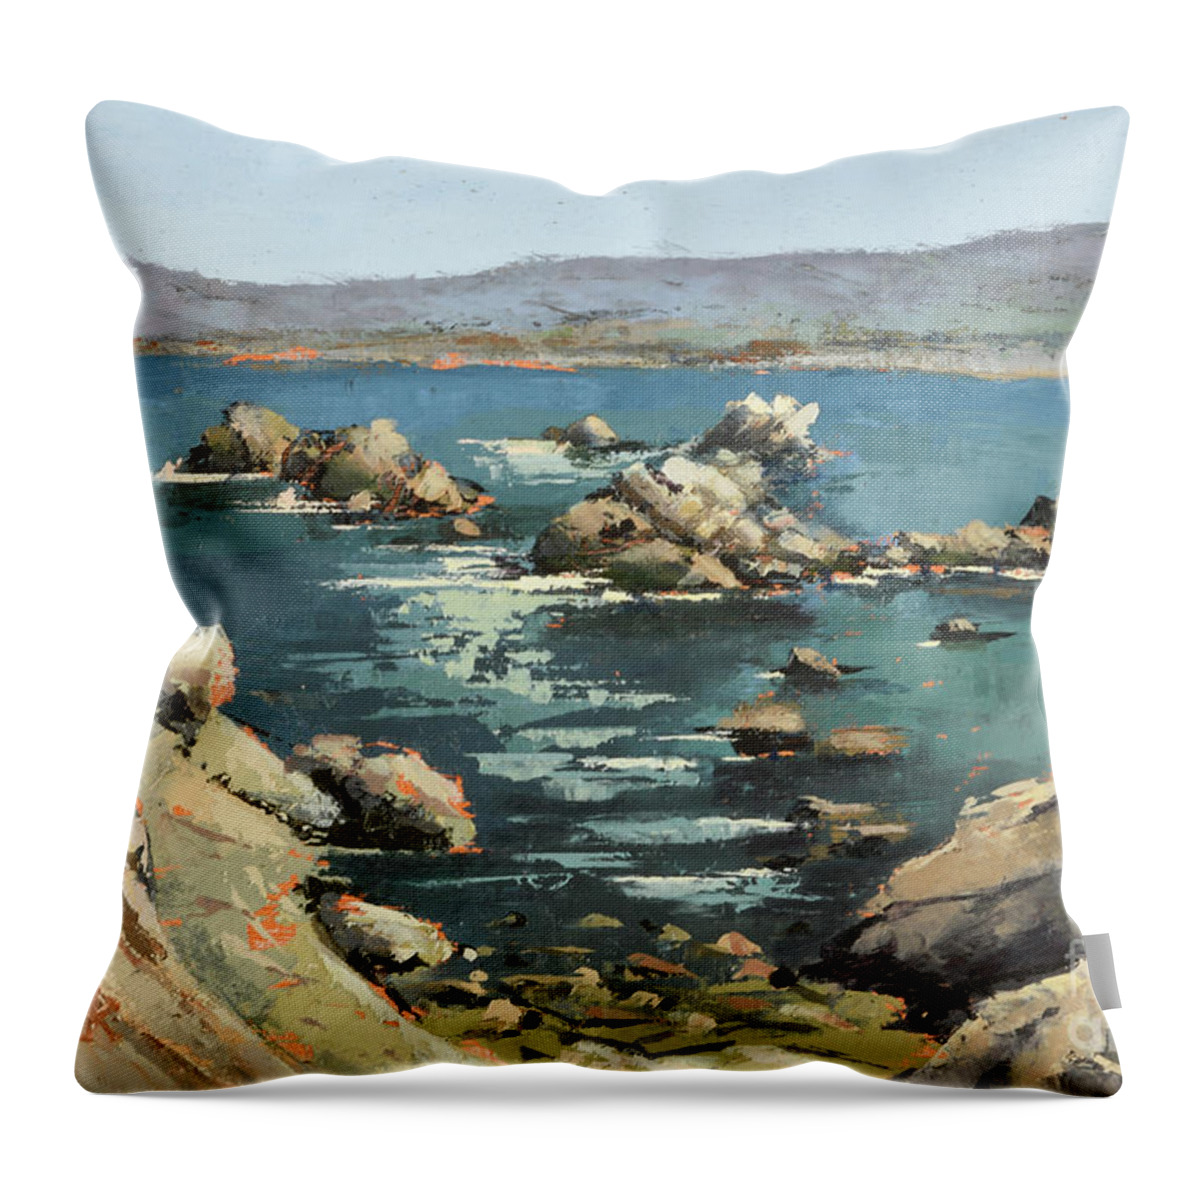 Landscape Throw Pillow featuring the painting Canary Point Overlook by PJ Kirk